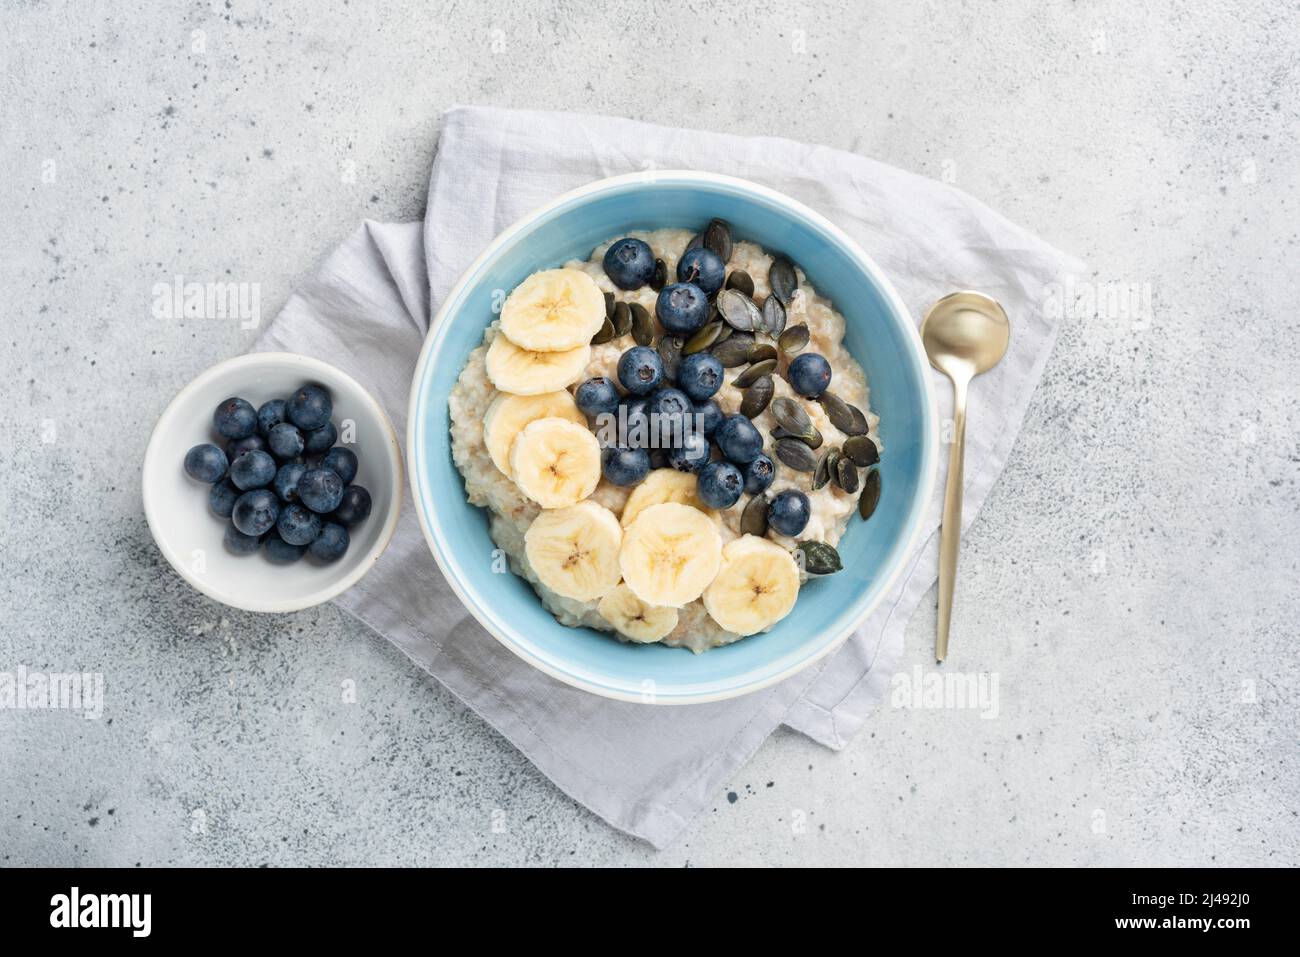 Healthy breakfast oatmeal porridge bowl with fruits and pumpkin seeds on grey concrete background. Top view Stock Photo